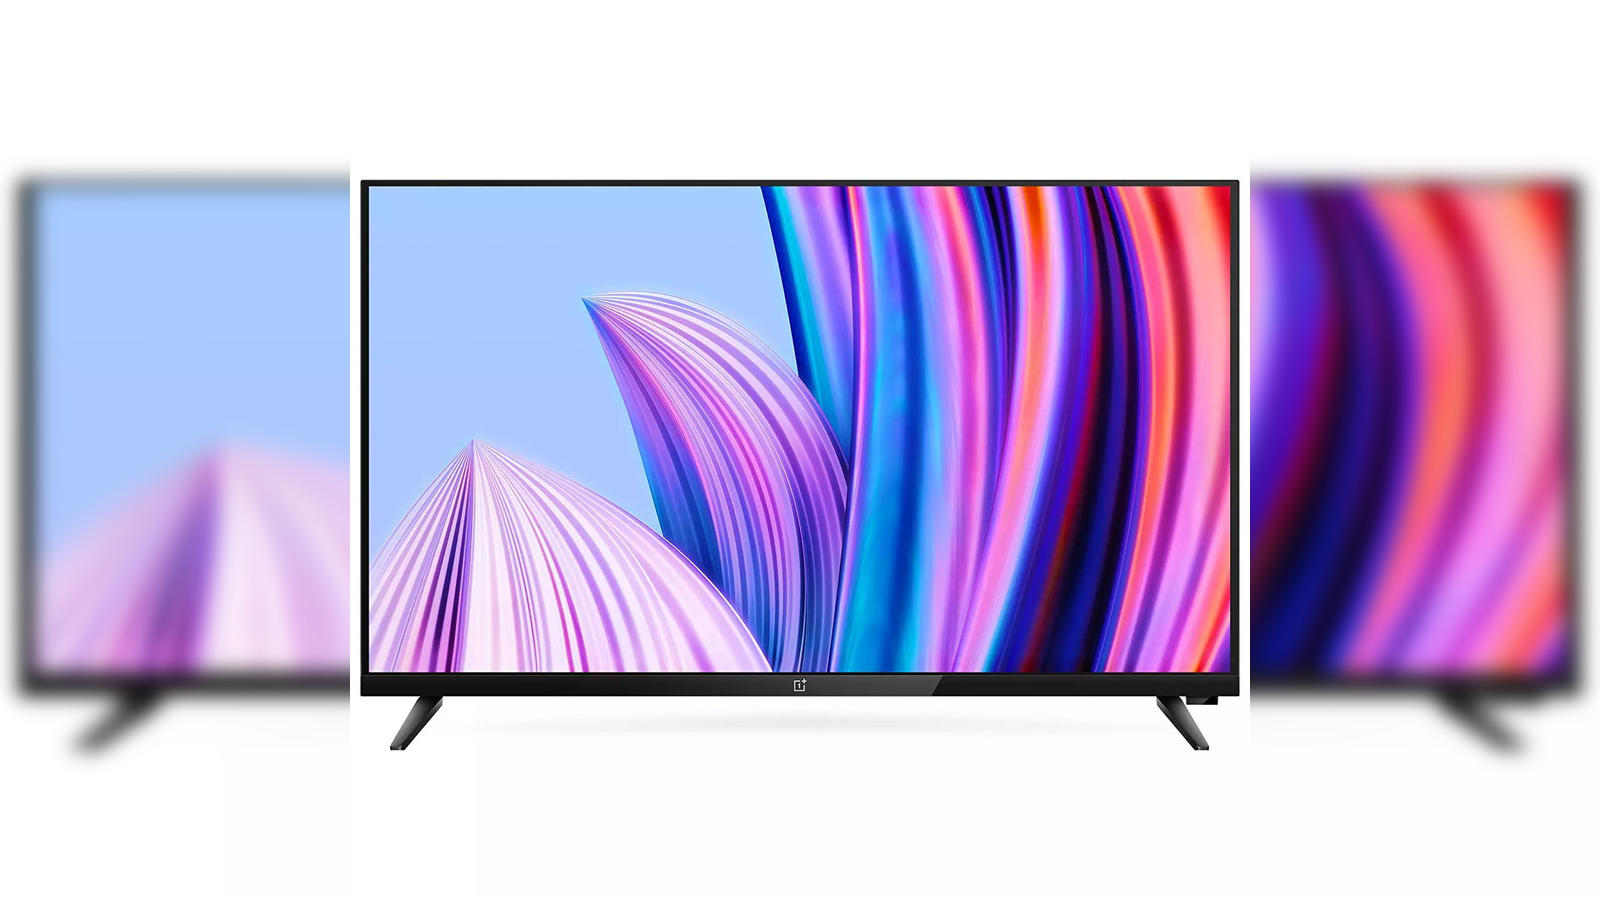 Top 10 LED TVs in India in 2023: November pick from these options